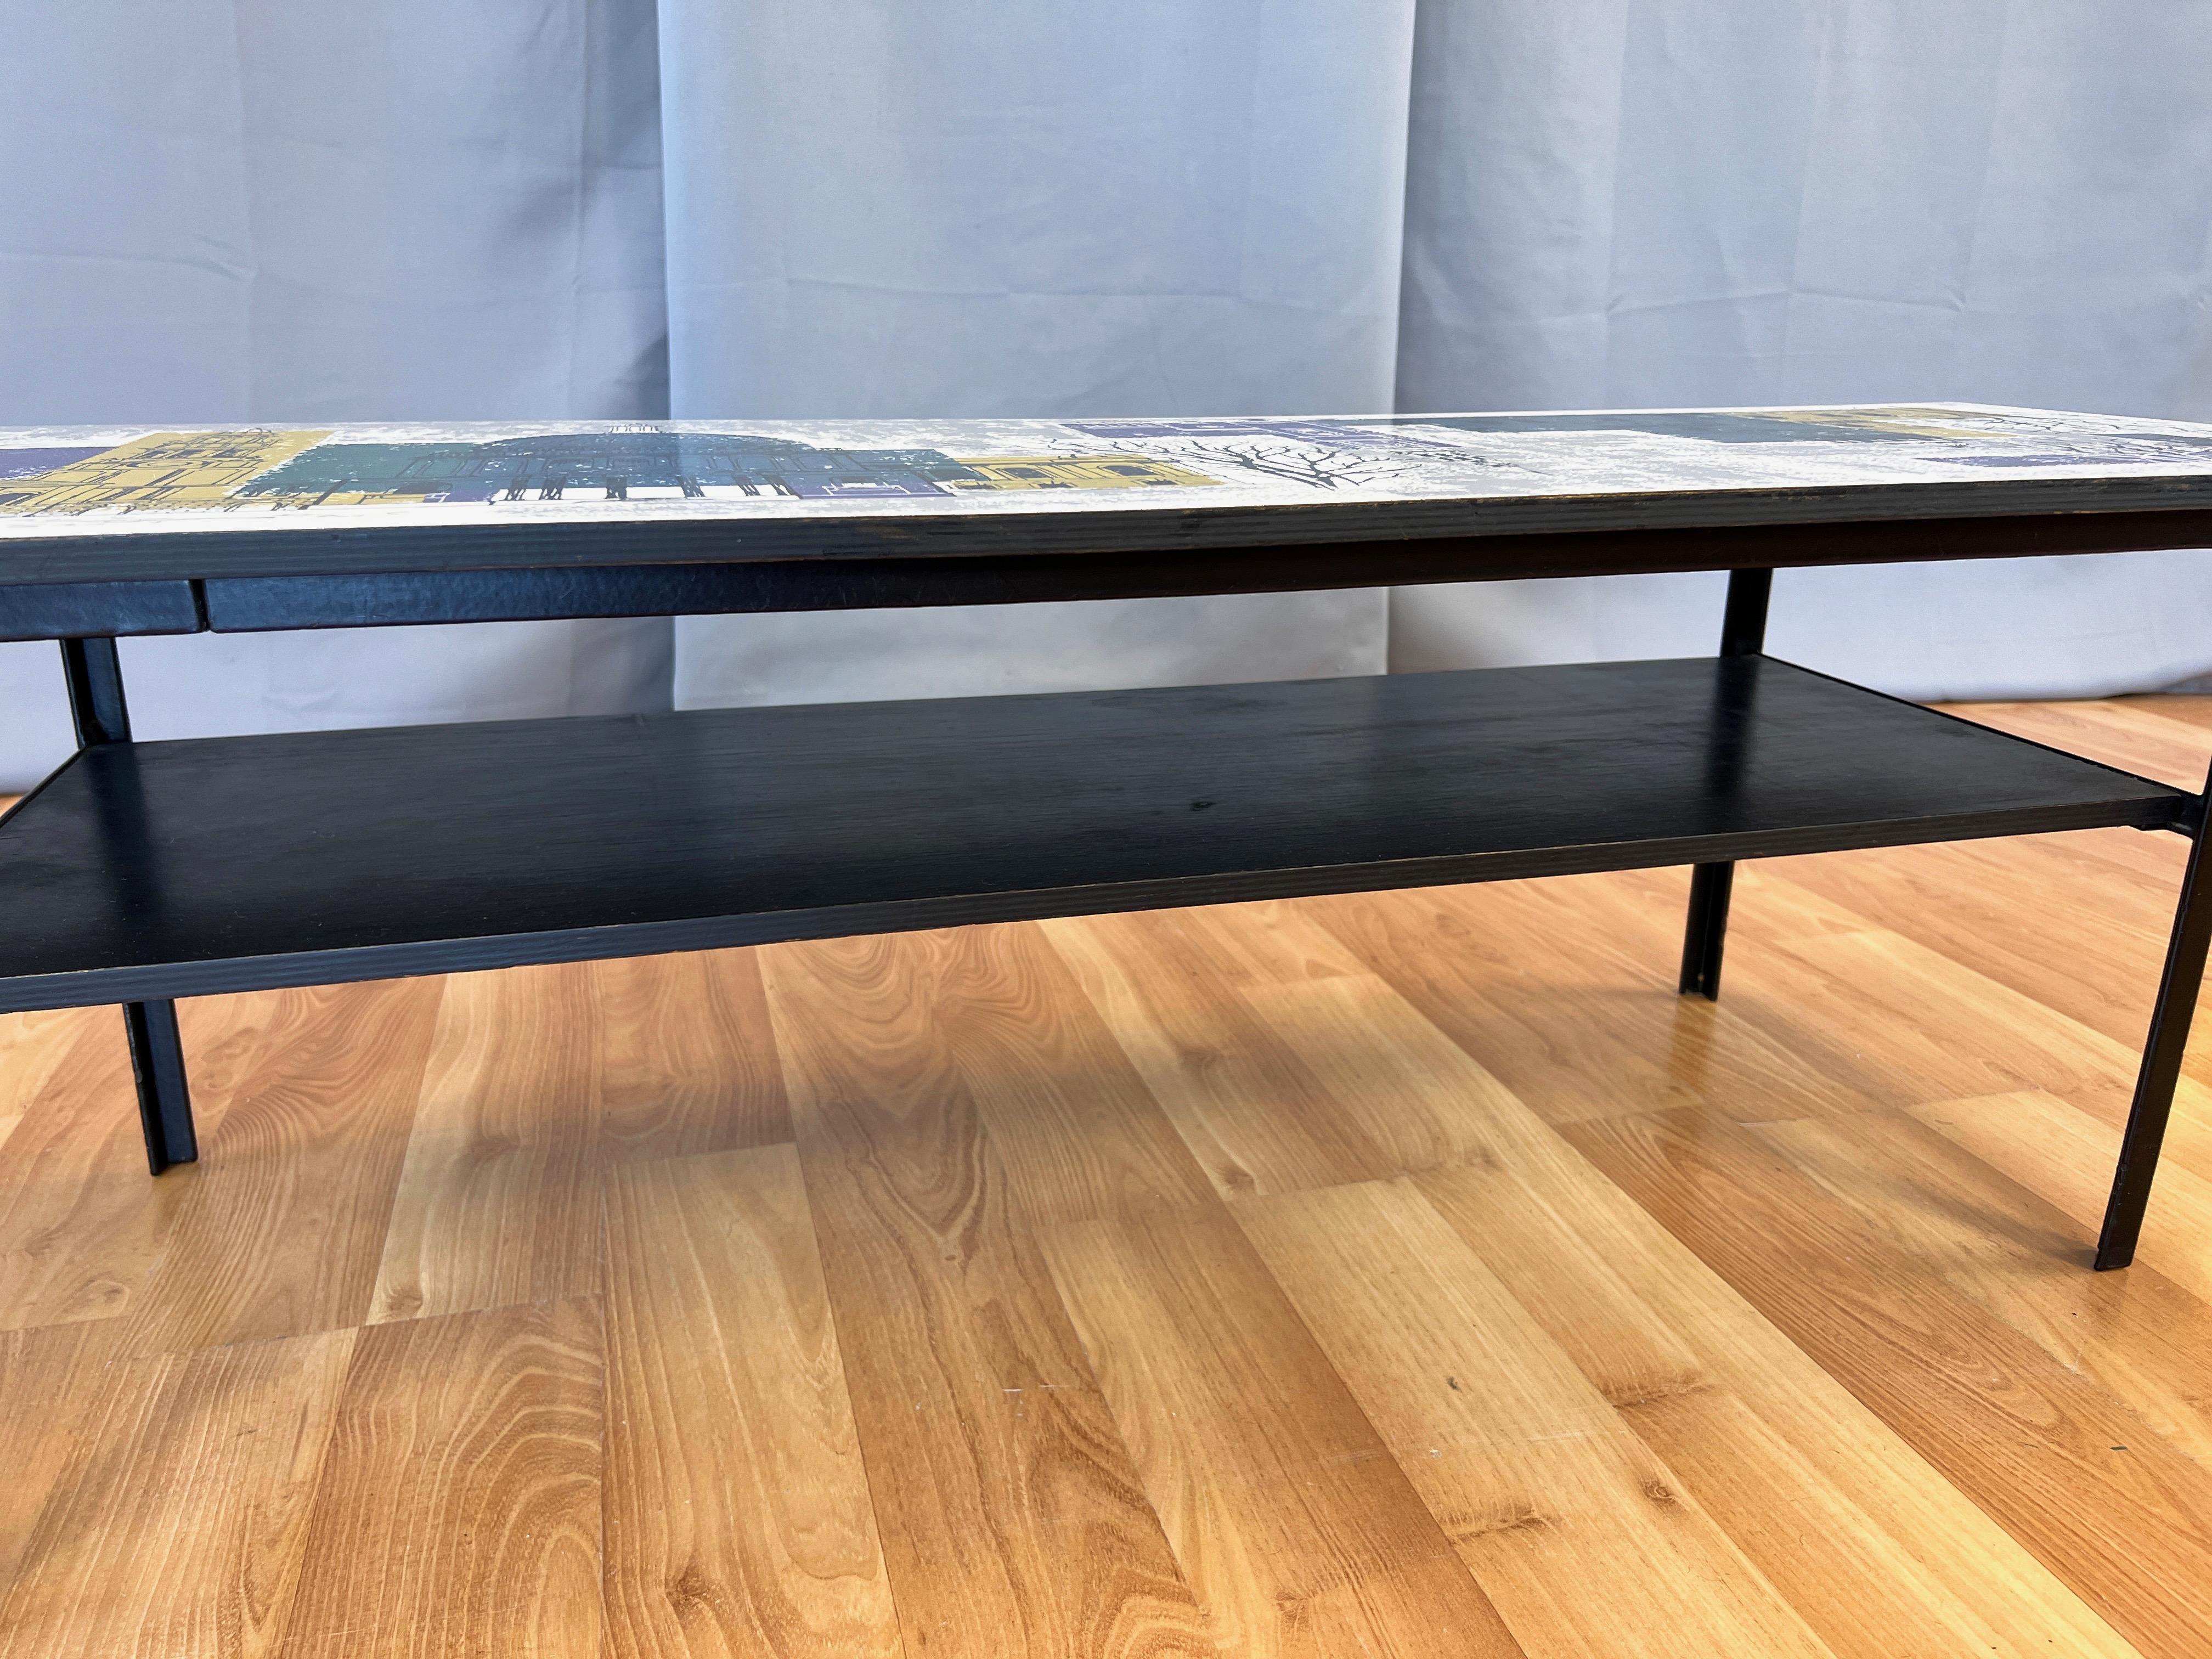 John Piper London Skyline Coffee Table by Myer for Conran and Heal’s, c. 1960 For Sale 3